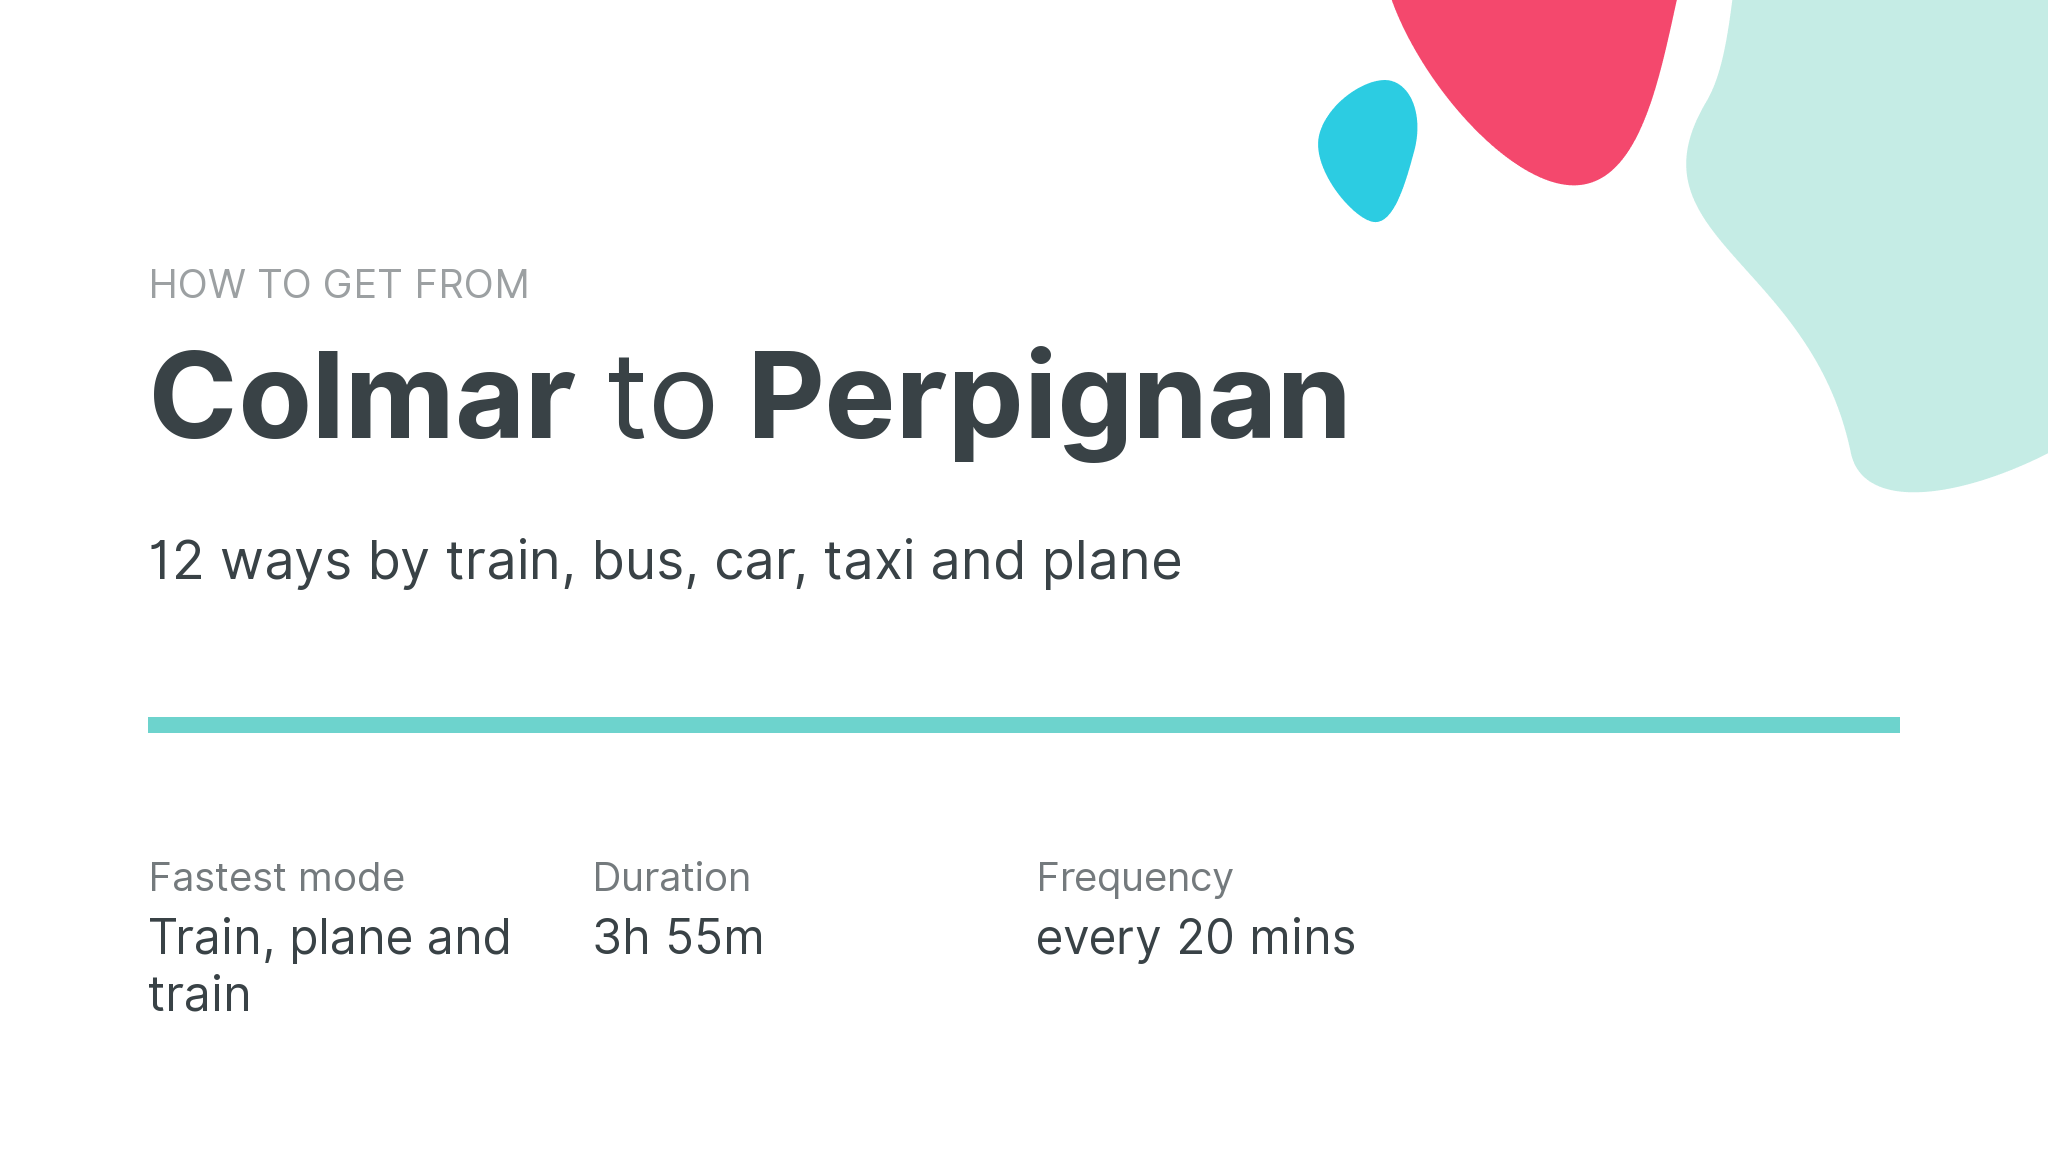 How do I get from Colmar to Perpignan